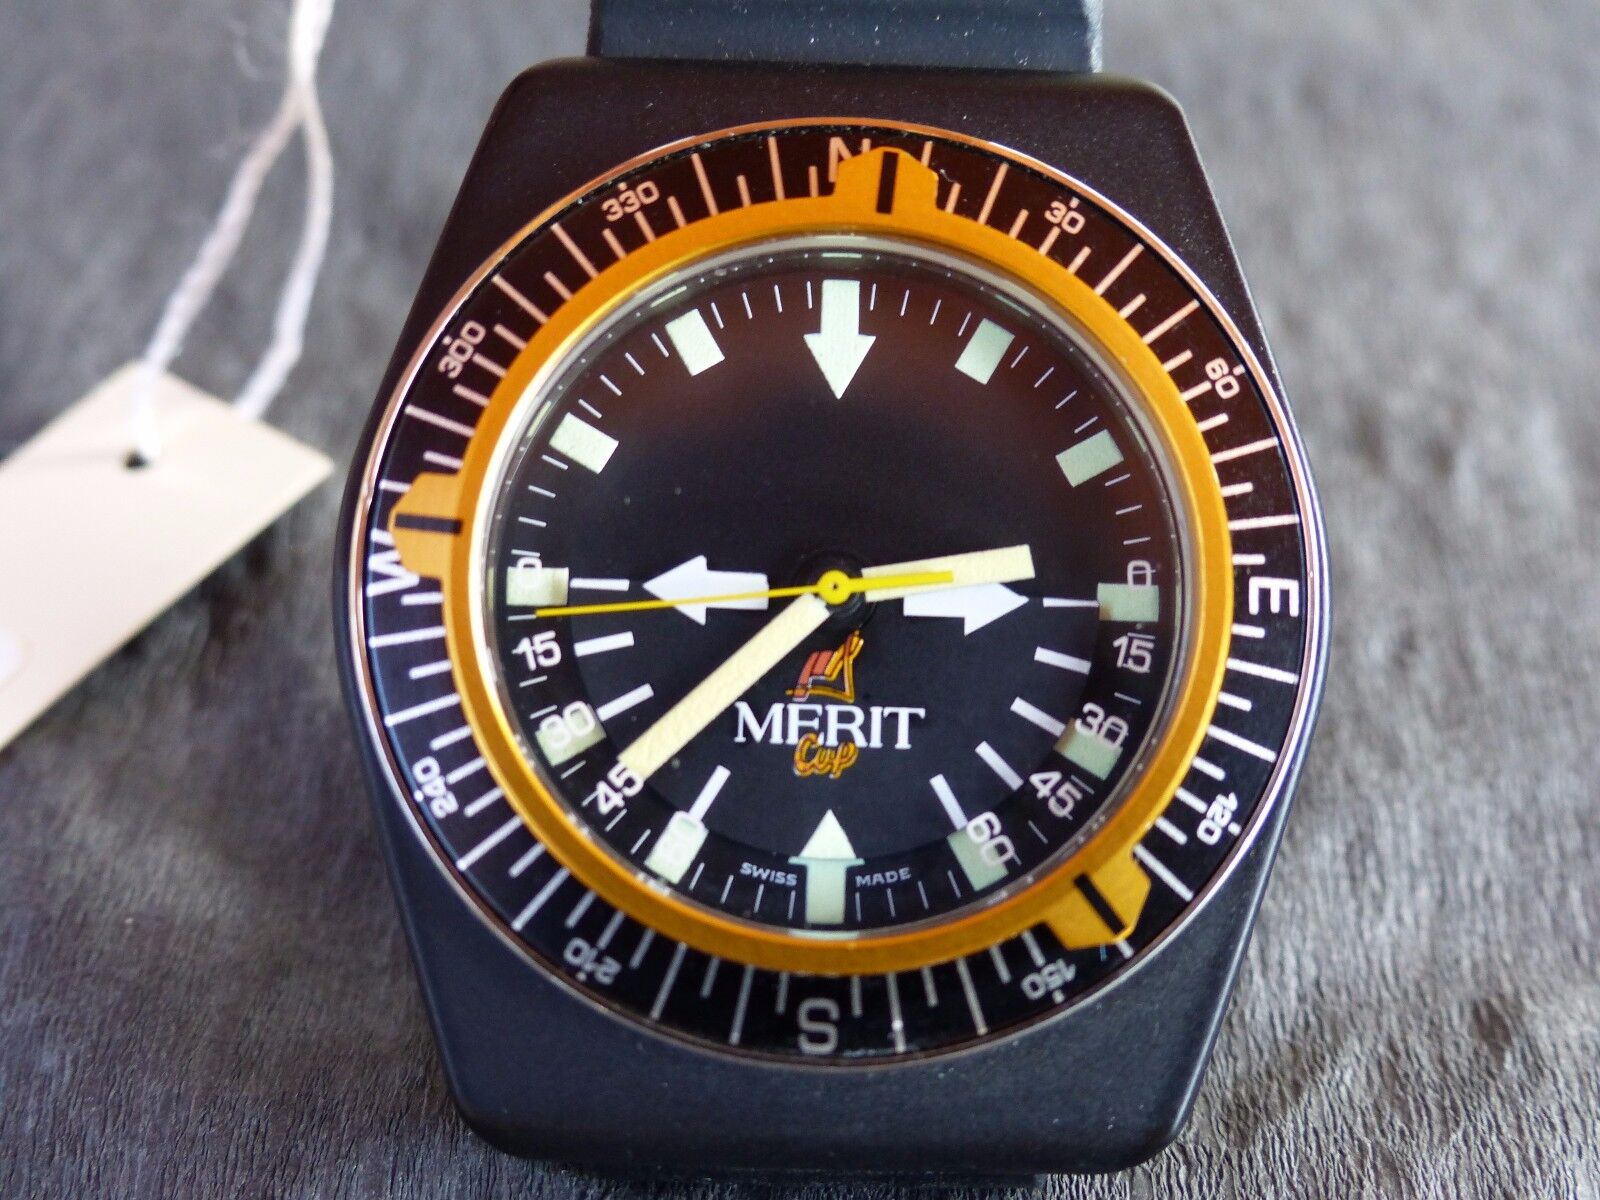 NEW Old Stock Yachting MERIT CUP WATCH rear hard to find !!!!